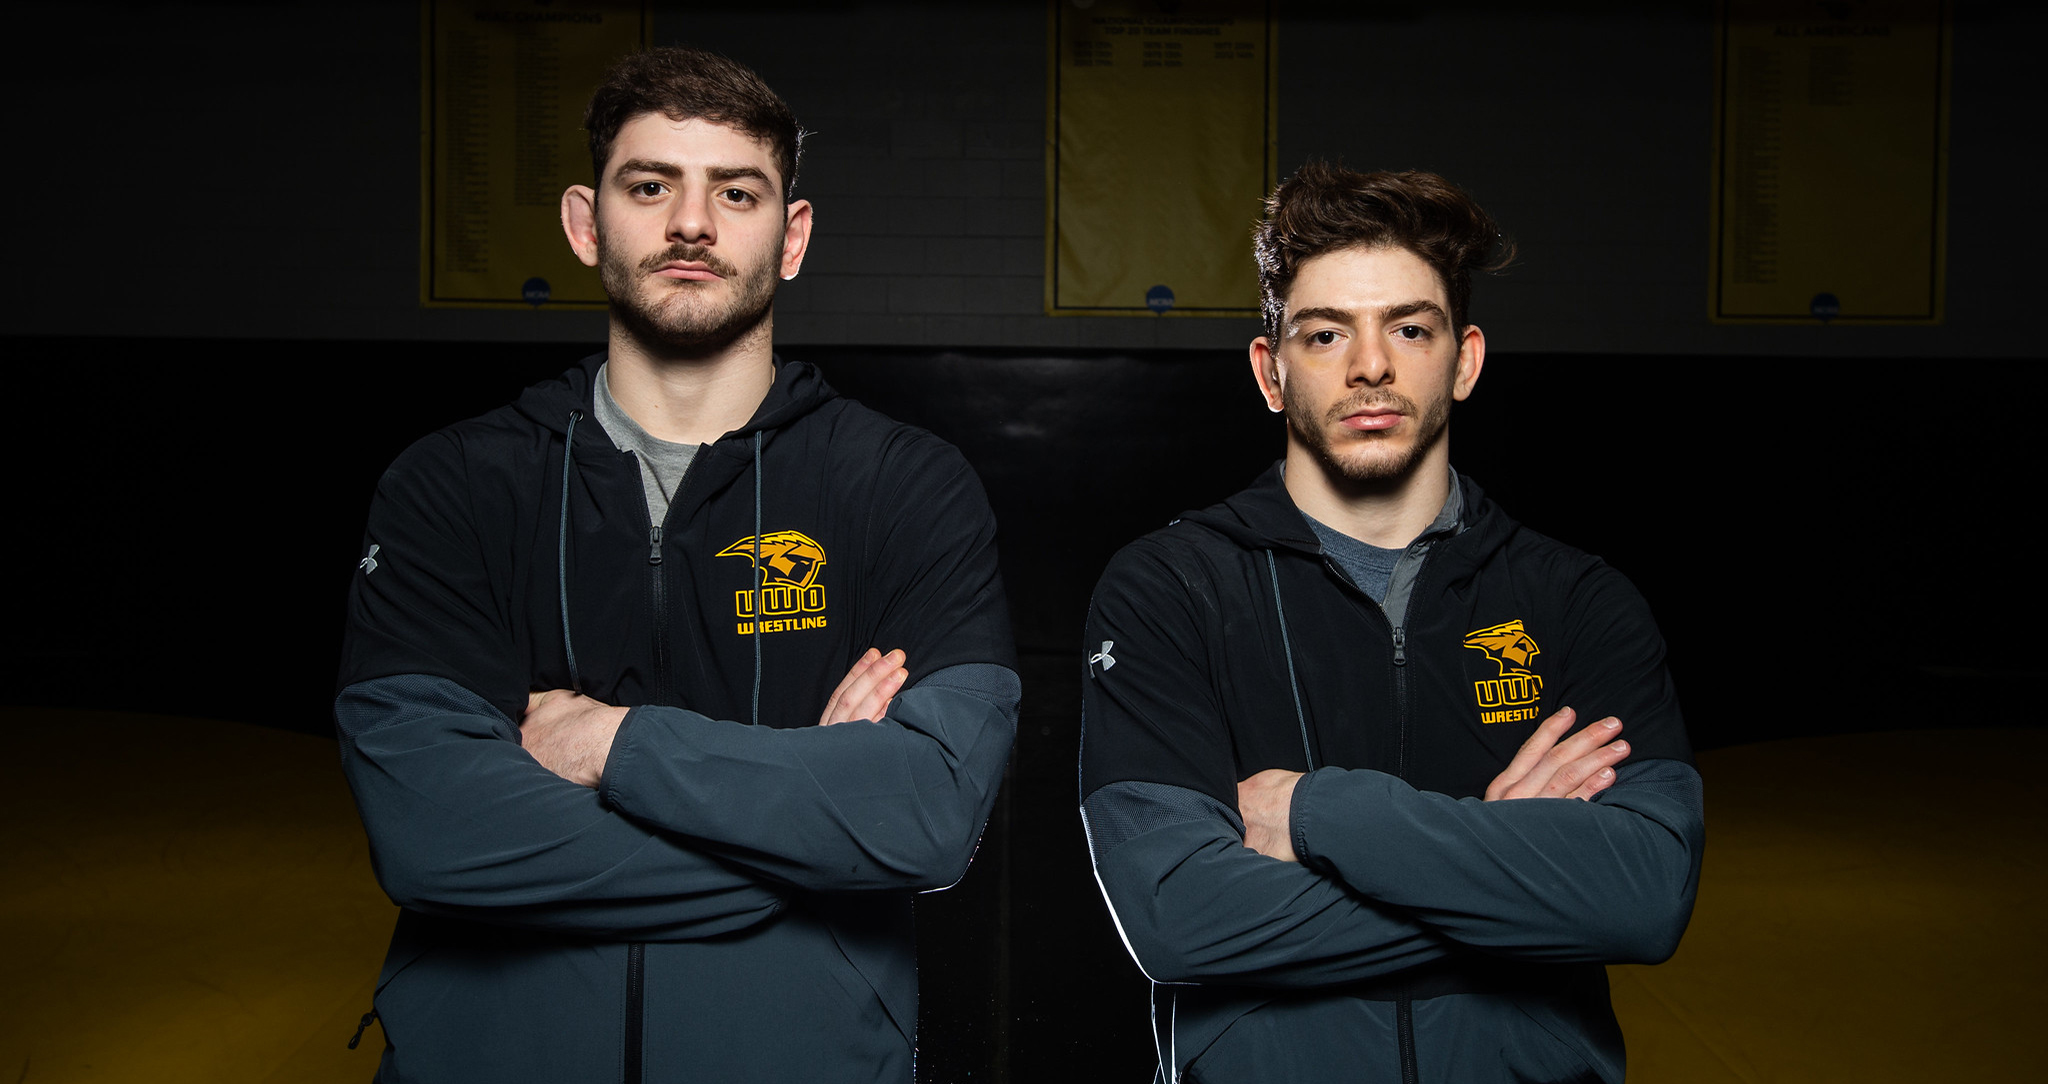 The Alabeds, Husam (left) and Wesam (right), have combined to wrestle 121 times for the Titans.